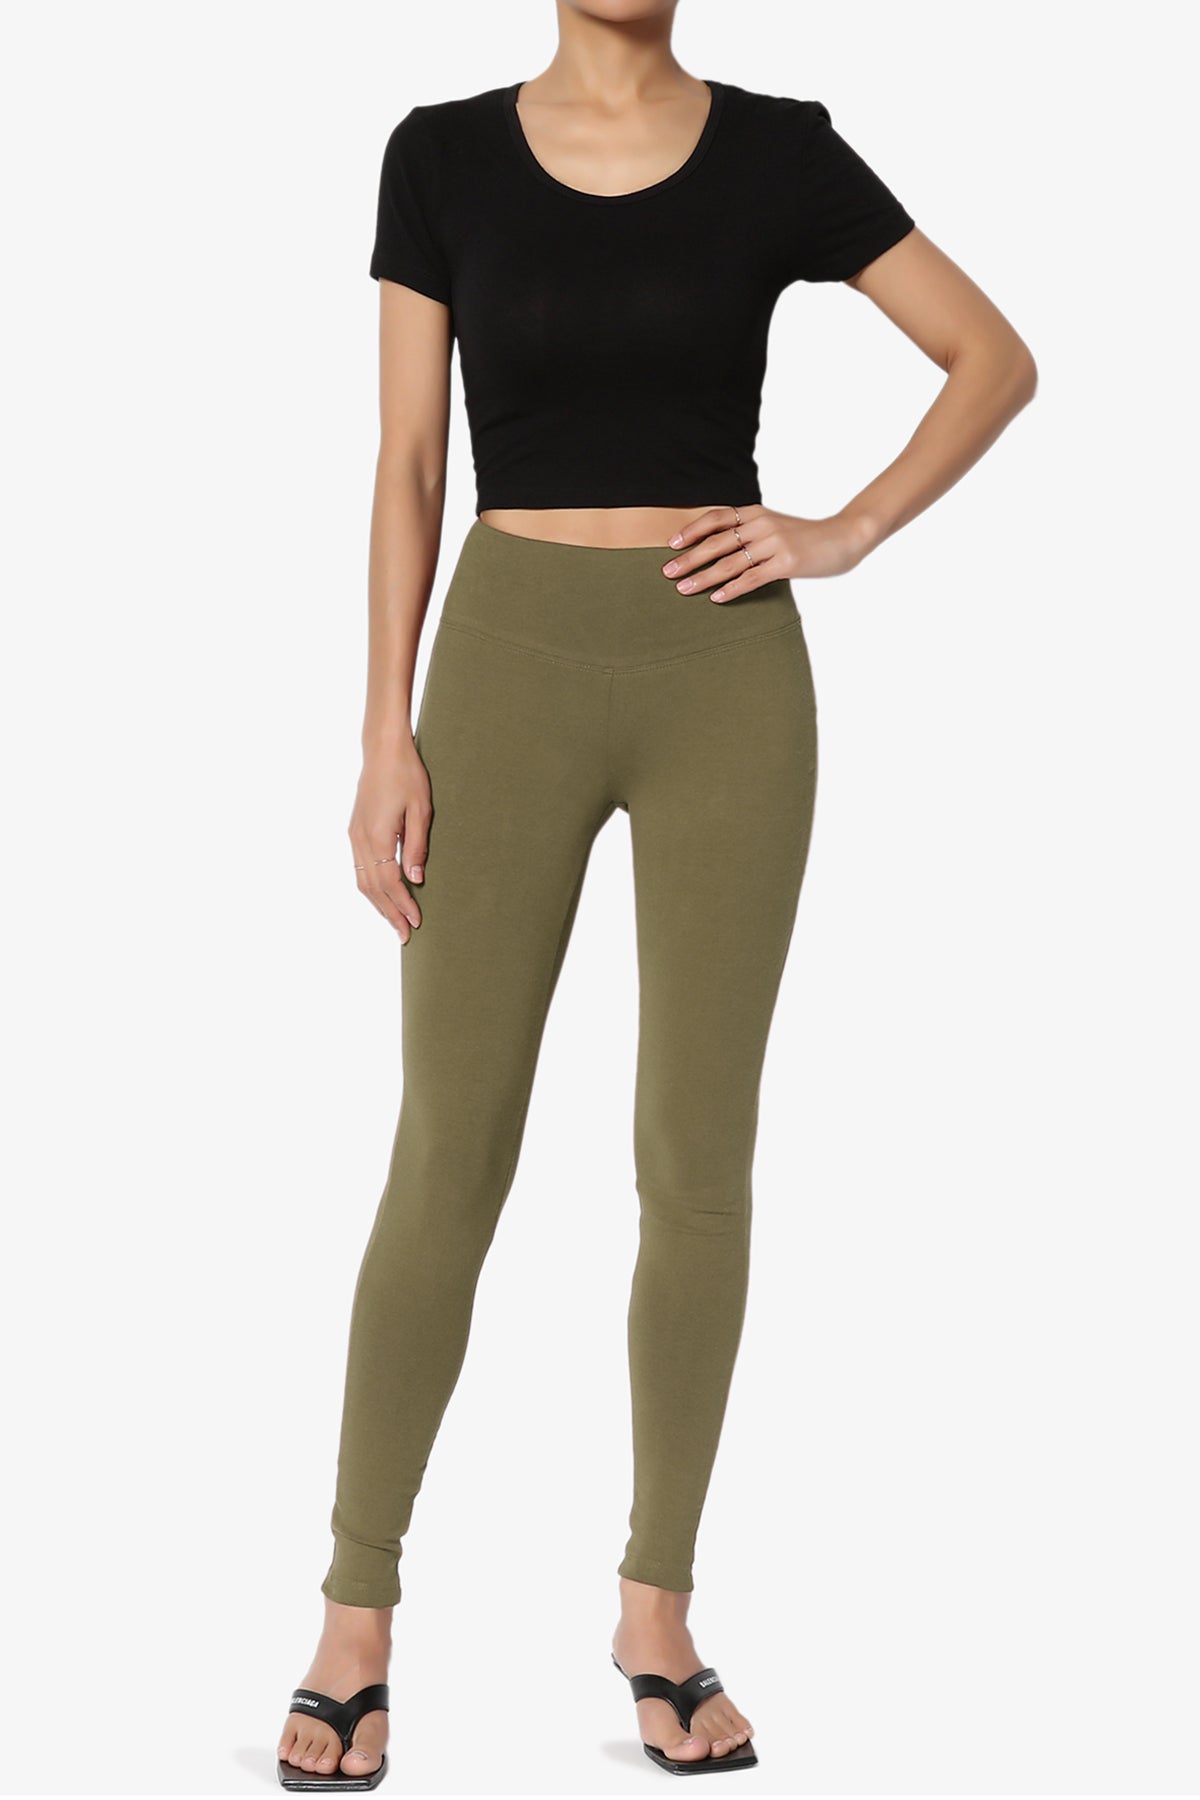 Ansley Cotton Wide Waistband Ankle Leggings PLUS MORE COLORS